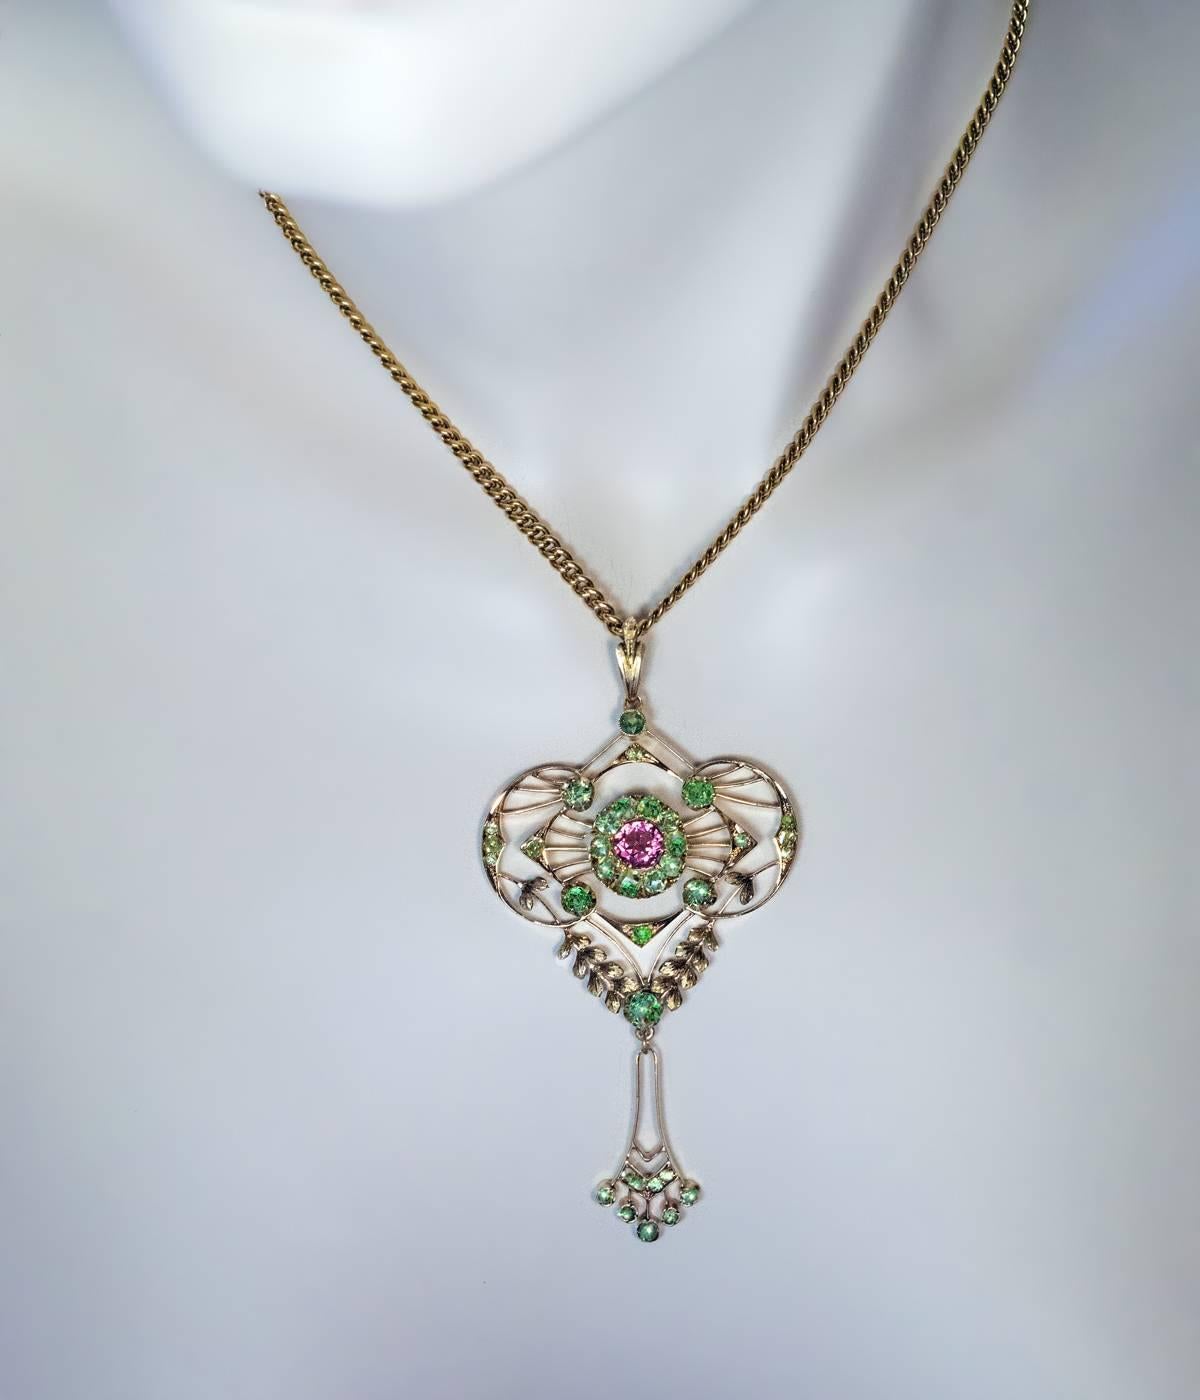 Made in Moscow between 1908 and 1917

A 14K rose and green gold openwork pendant in Russian Modern style of the 1910s (with both elements of Art Nouveau and Edwardian Garland style) is embellished with green Russian demantoids and a pink